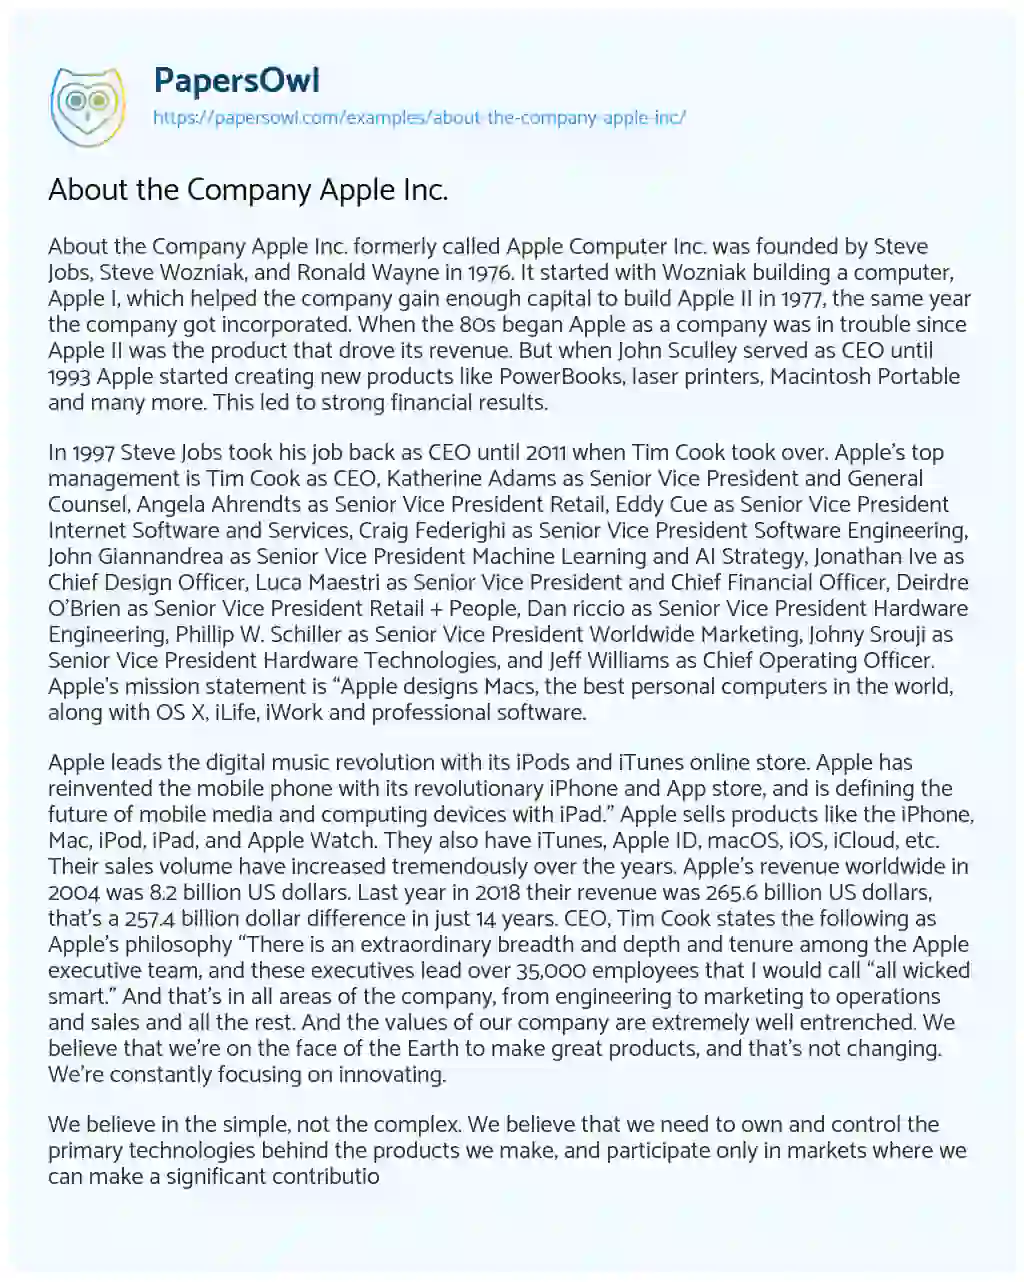 About the Company Apple Inc. essay